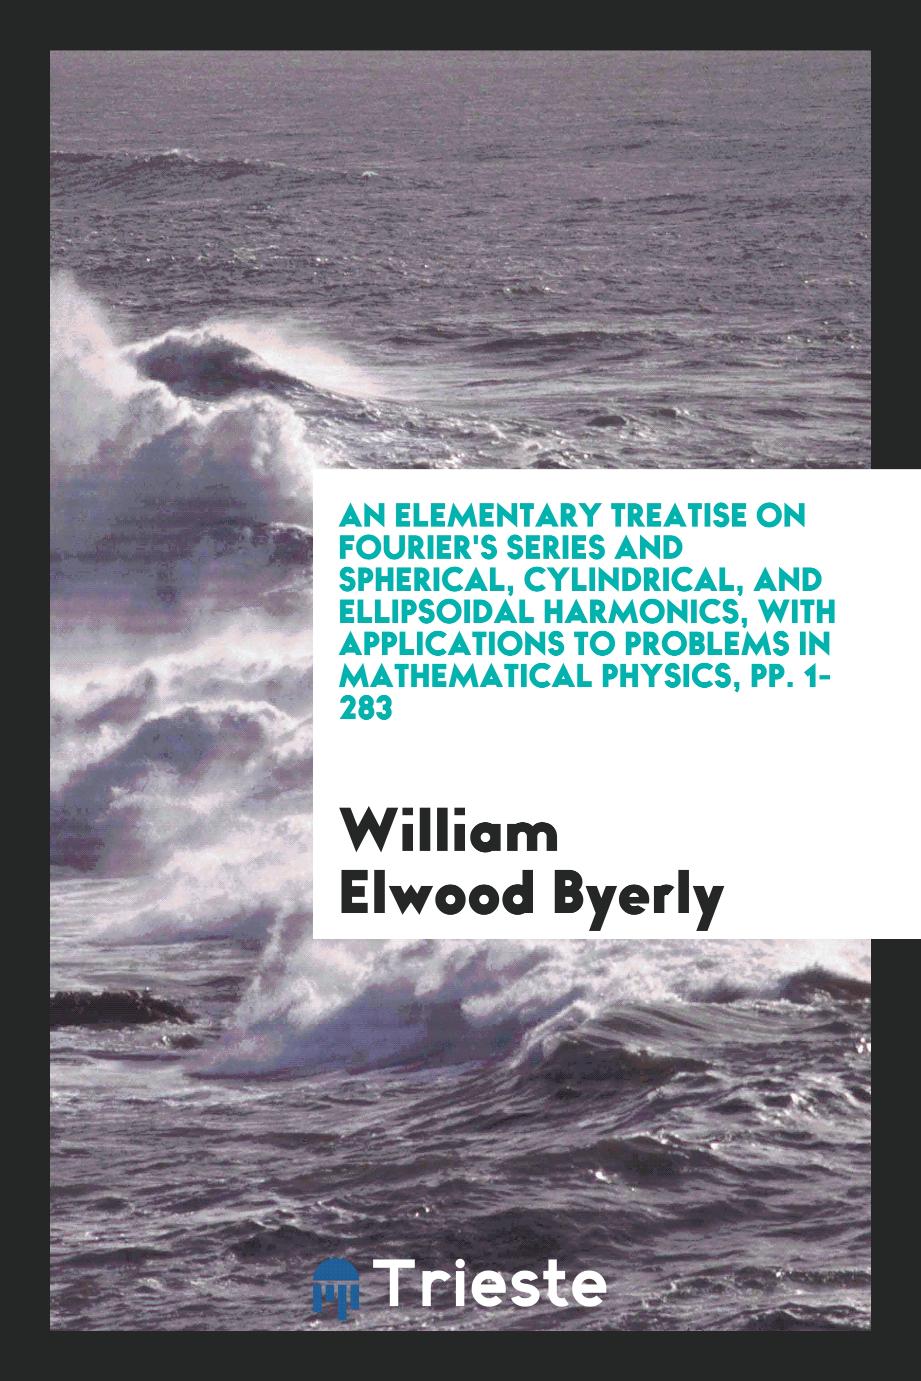 An Elementary Treatise on Fourier's Series and Spherical, Cylindrical, and Ellipsoidal Harmonics, with Applications to Problems in Mathematical Physics, pp. 1-283